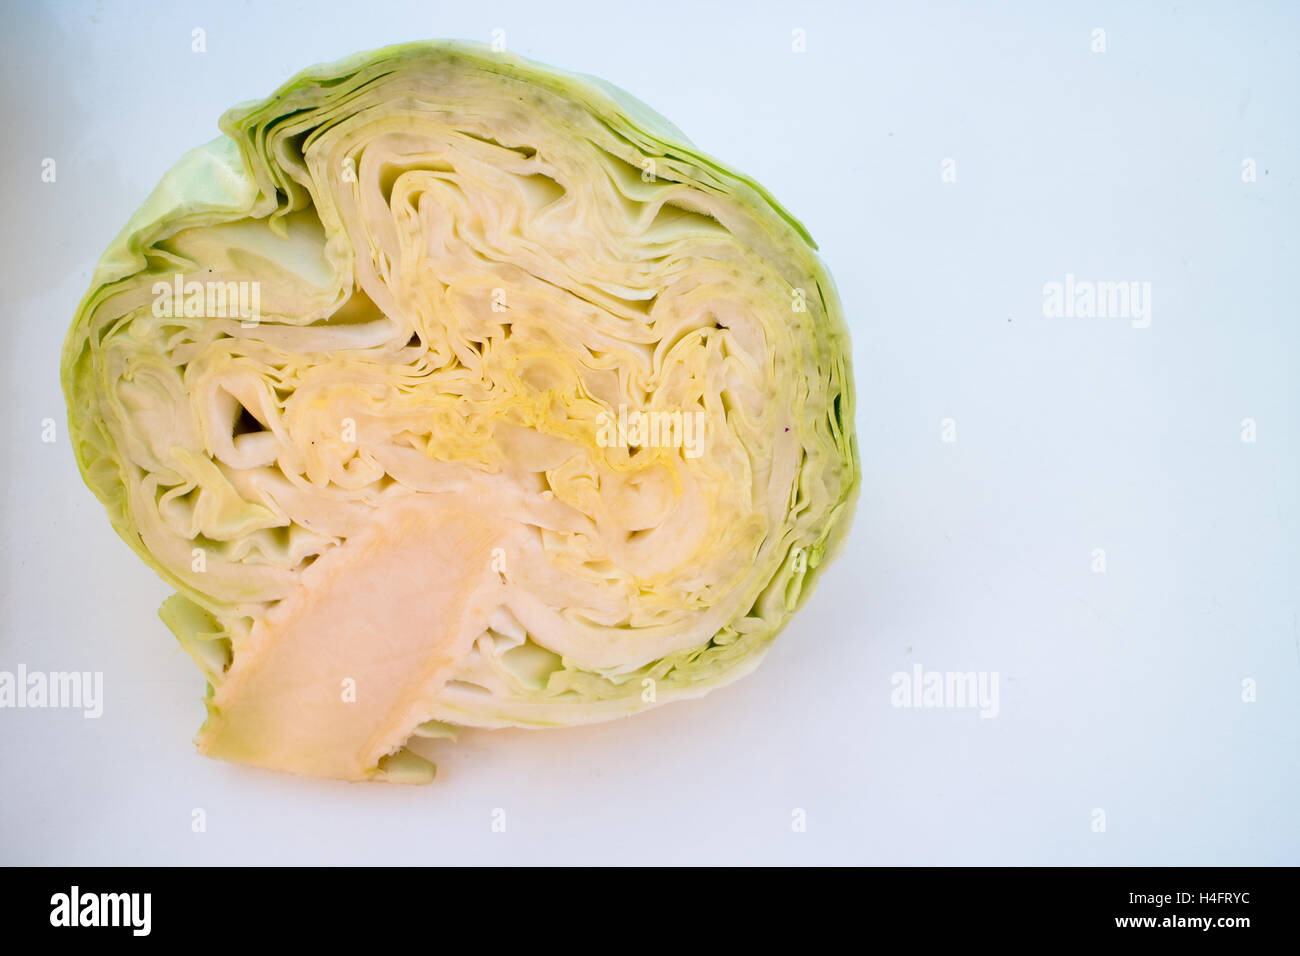 Half of a Green cabbage eating local from a farm, farm inspired Stock Photo